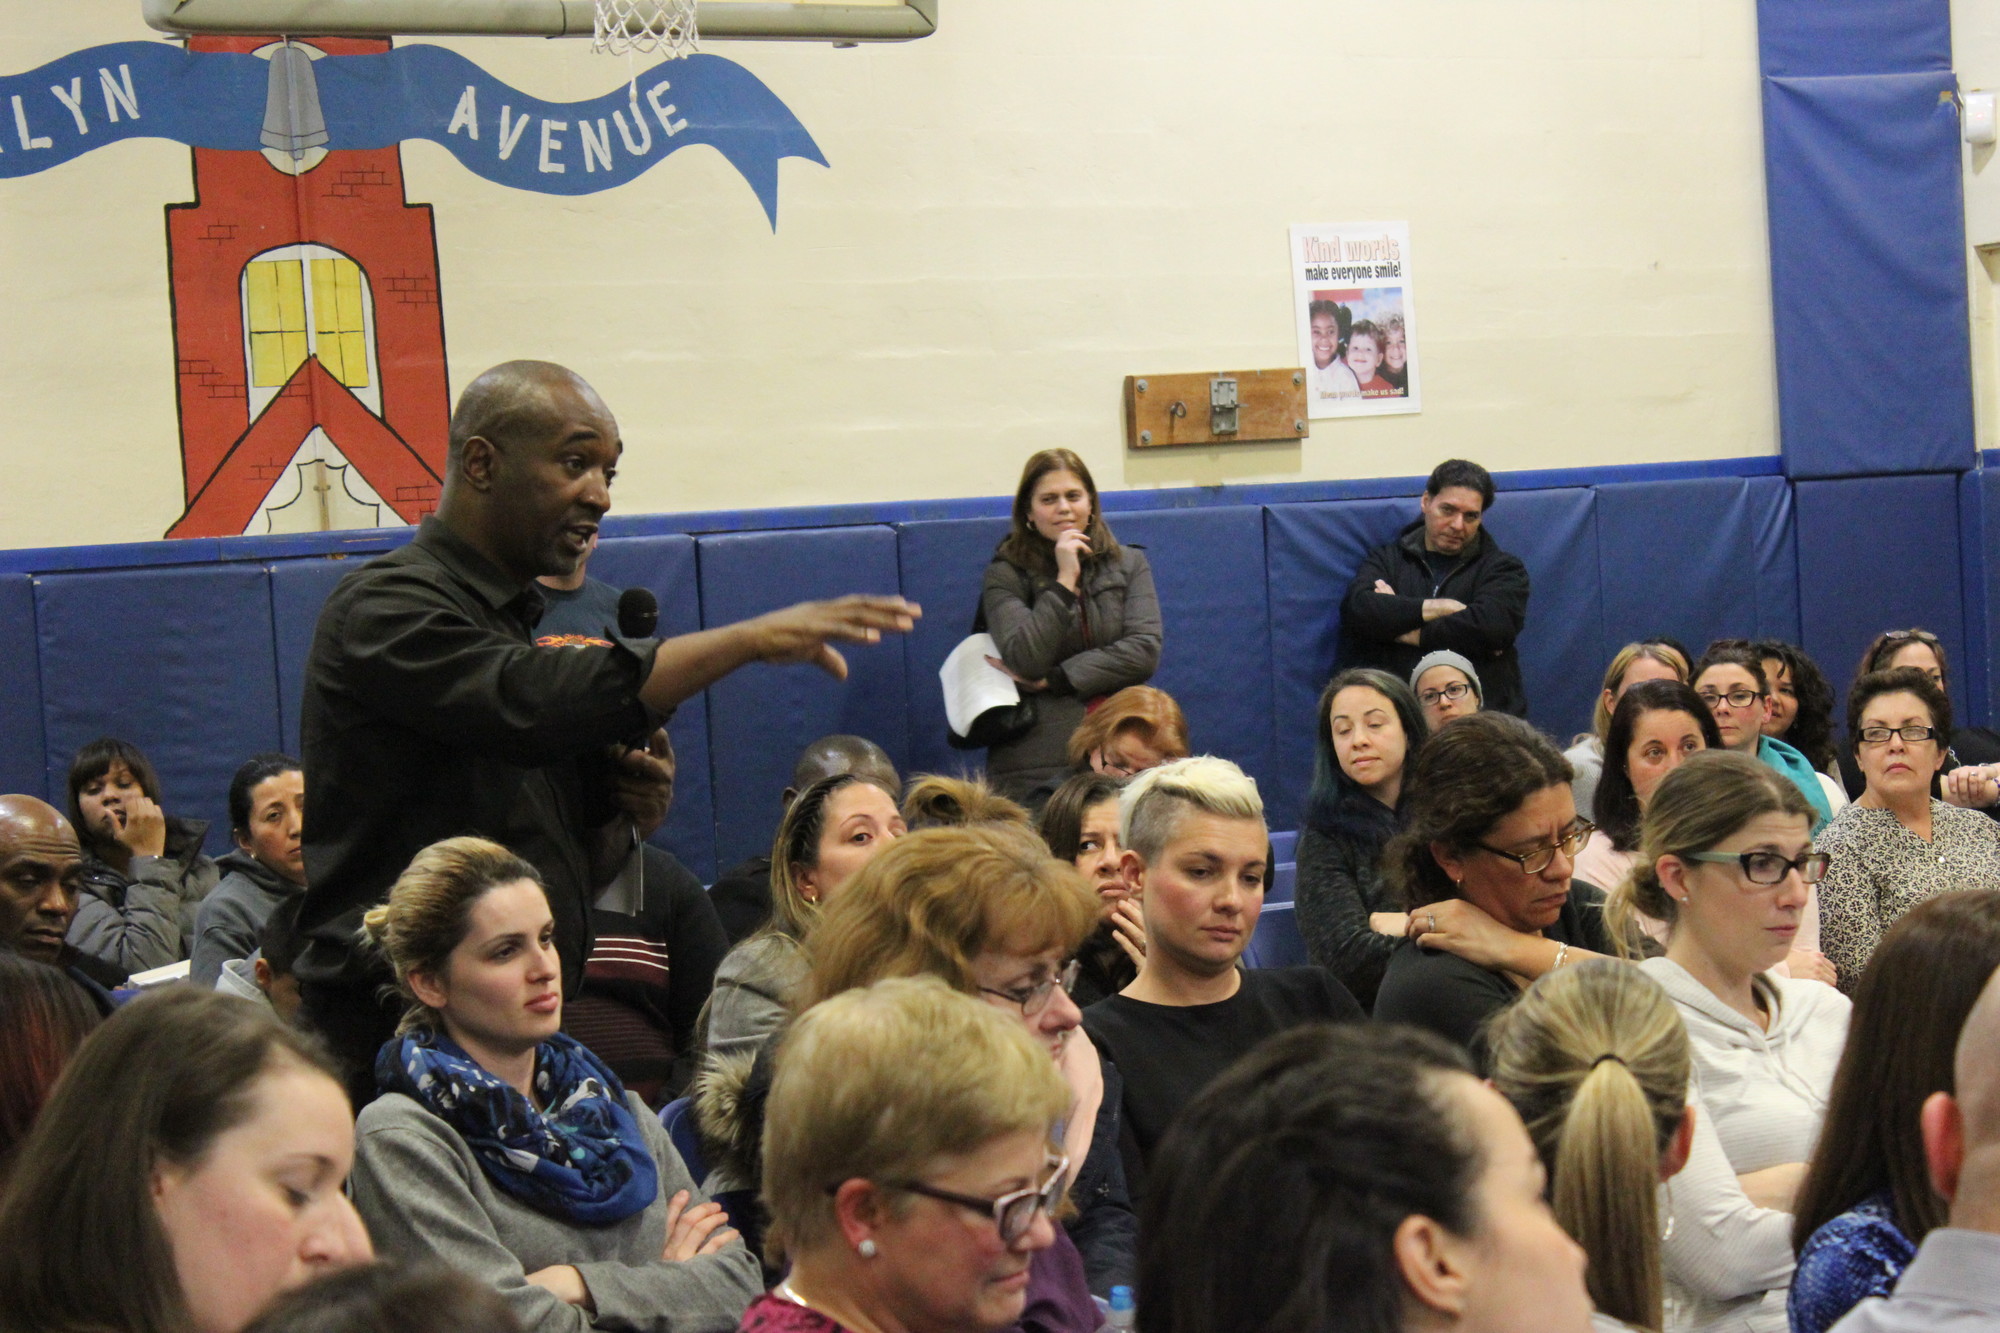 Andre Divine, a parent, voiced his concerns about financing facilities upgrades at the Jan. 27 board meeting.